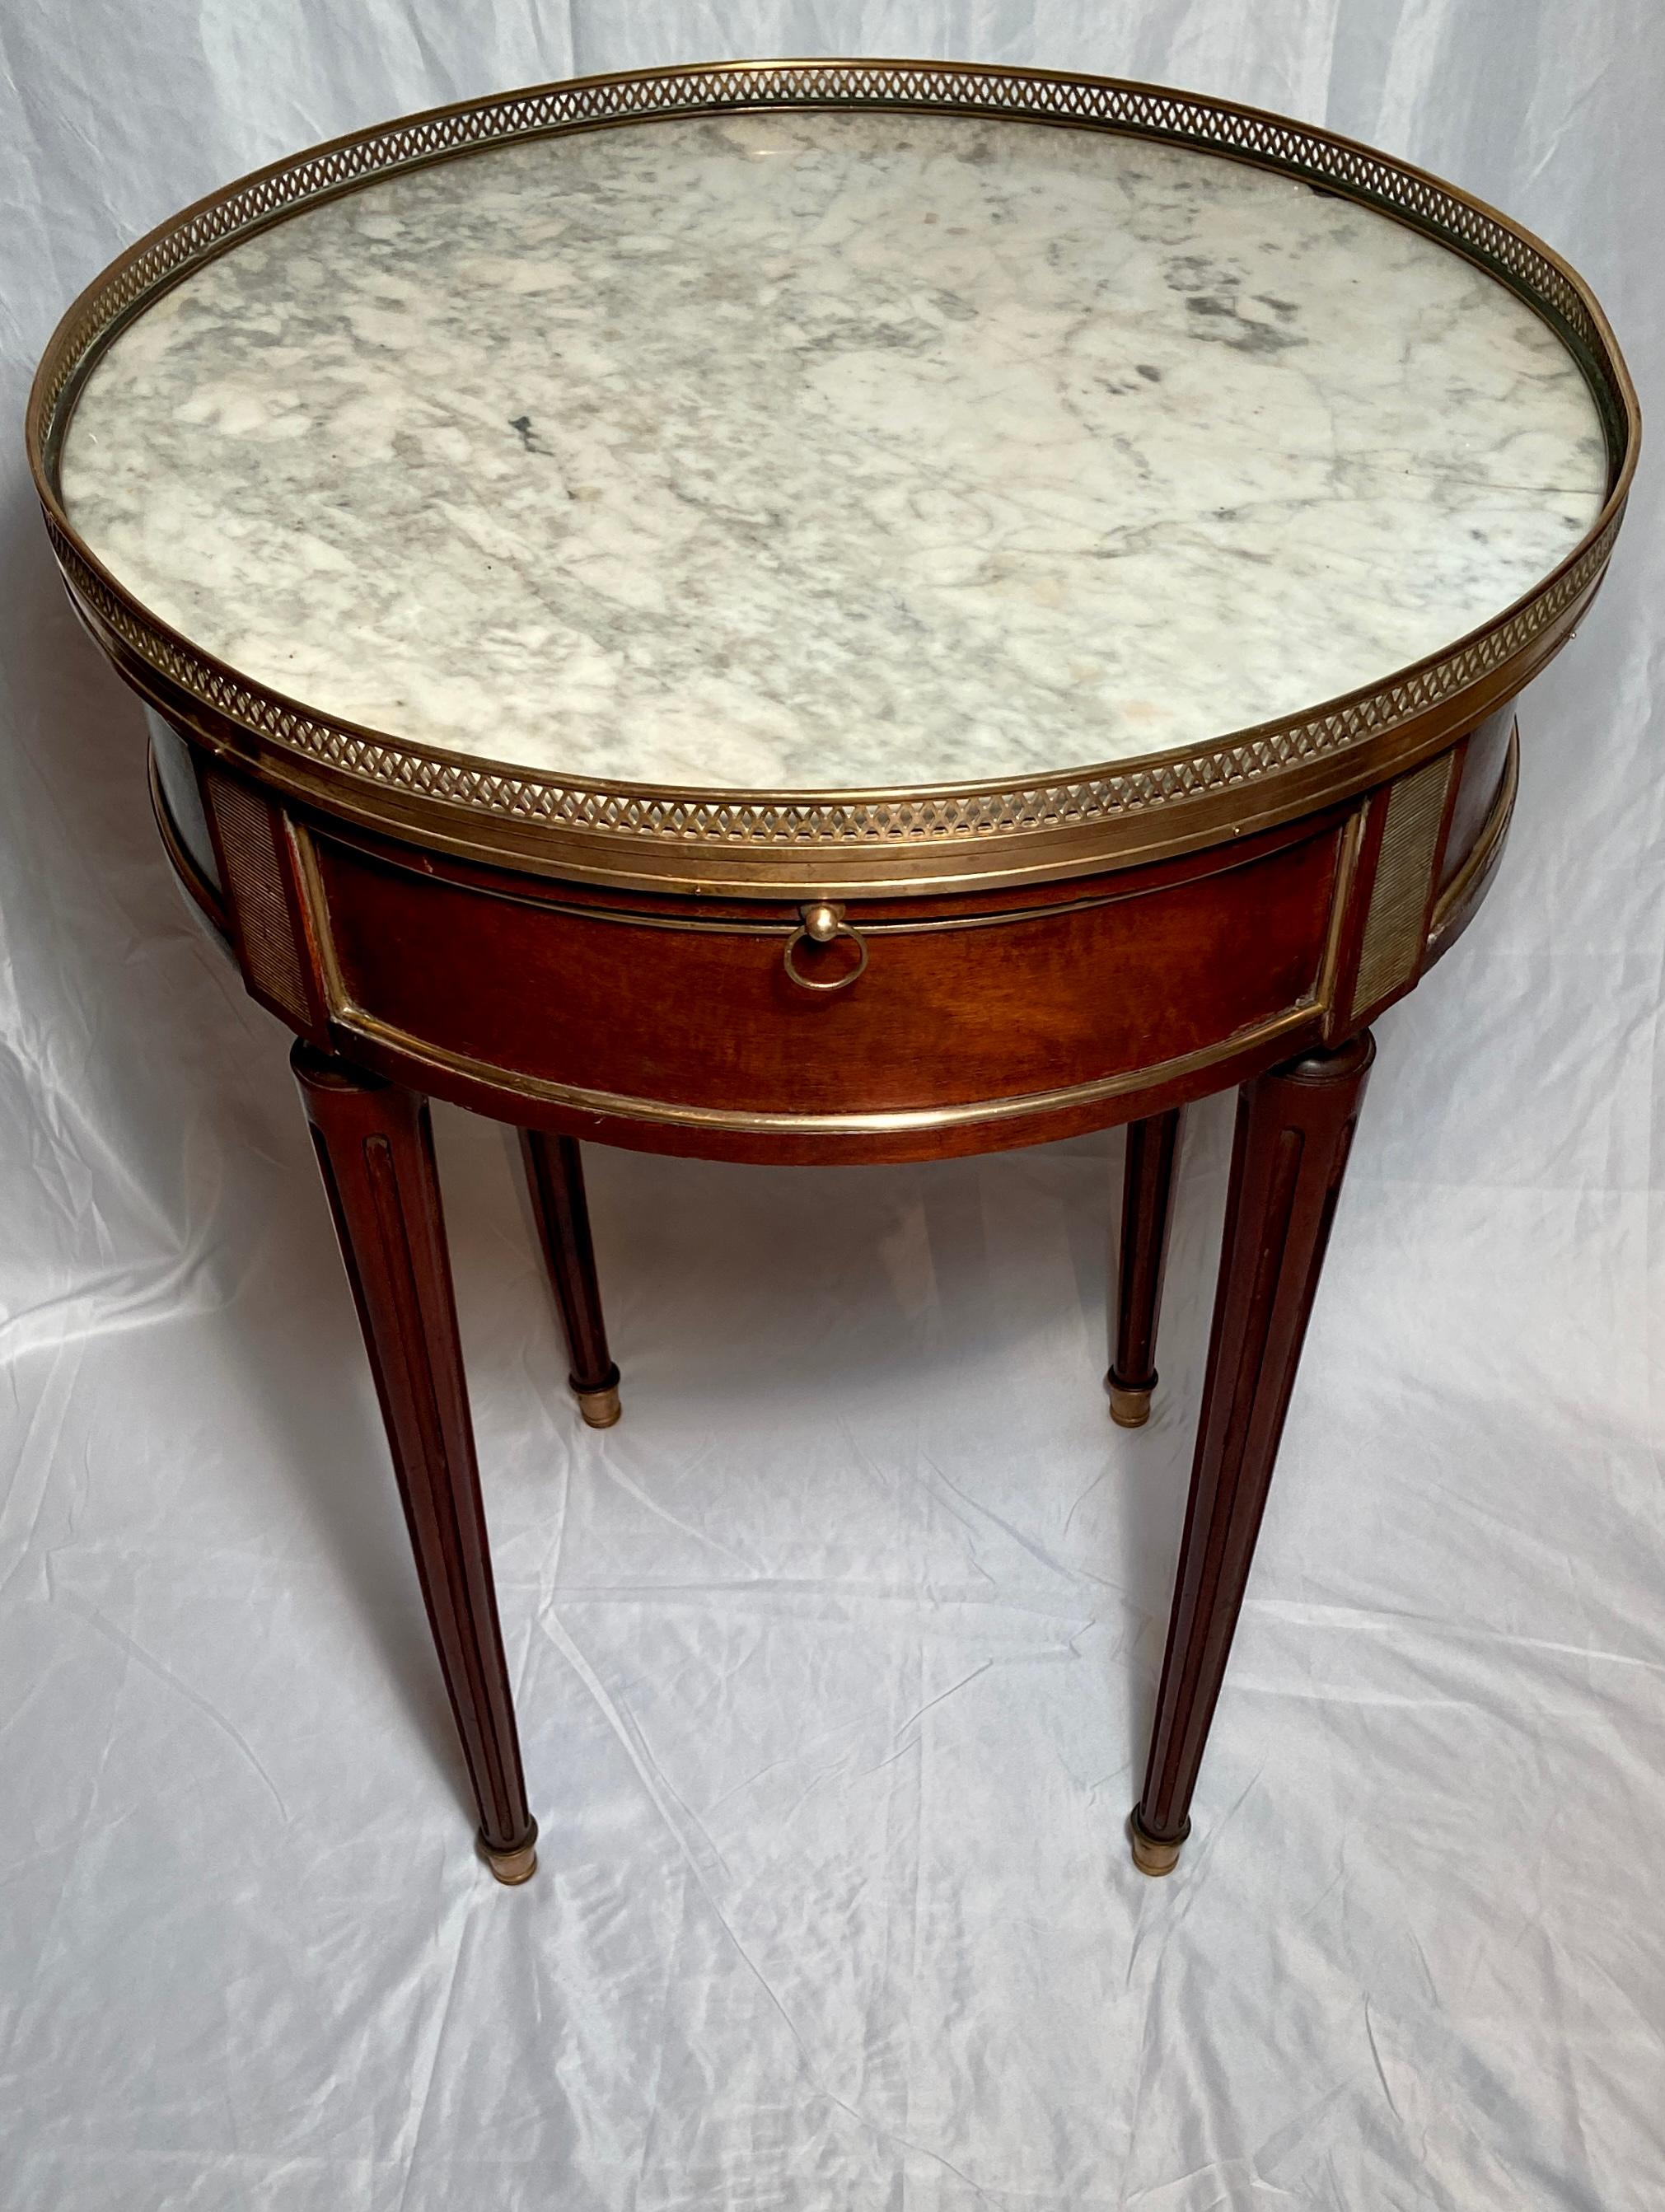 Antique French Mahogany and gold bronze Bouillotte Table, Circa 1890.